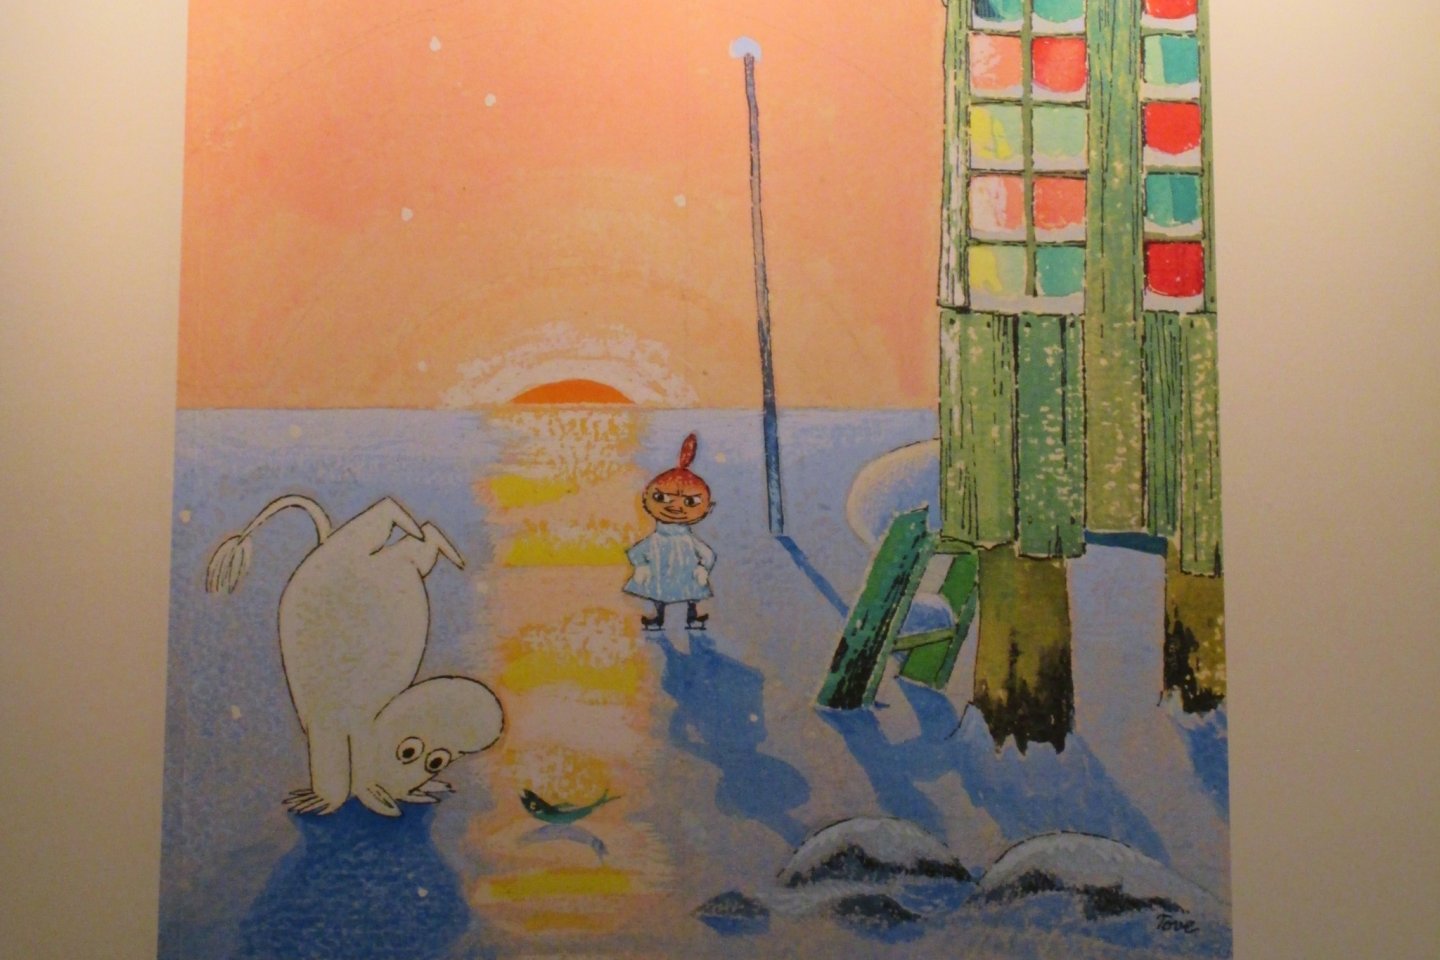 The Hiroshima Prefectural Art Museum invites fans to explore the world of Moomin in celebration of Tove Jansson's 100th birthday